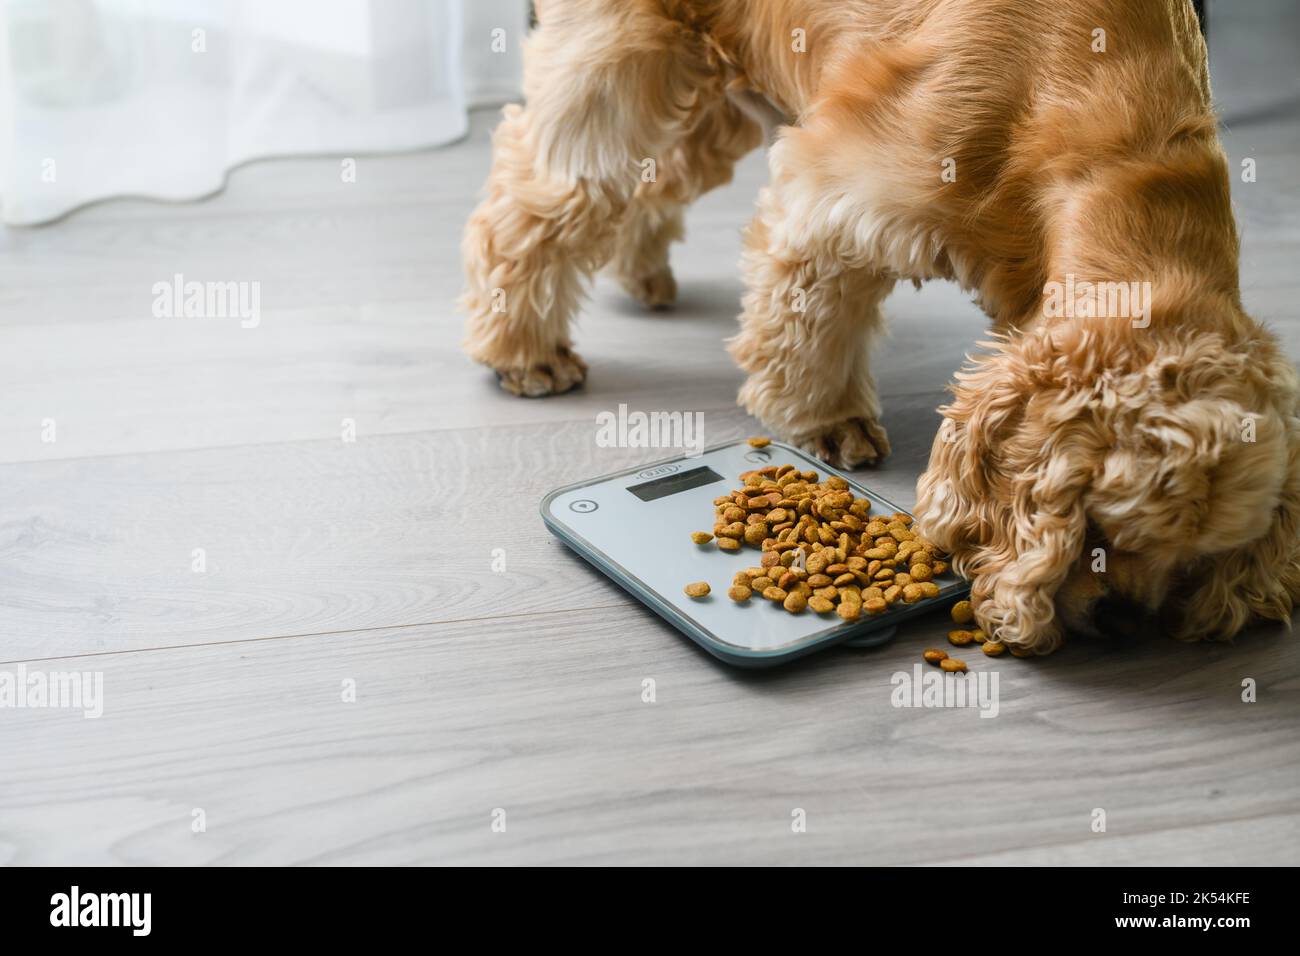 Dogs Feet Standing On A Scale With A Food Bowl Beside It Stock Photo -  Download Image Now - iStock